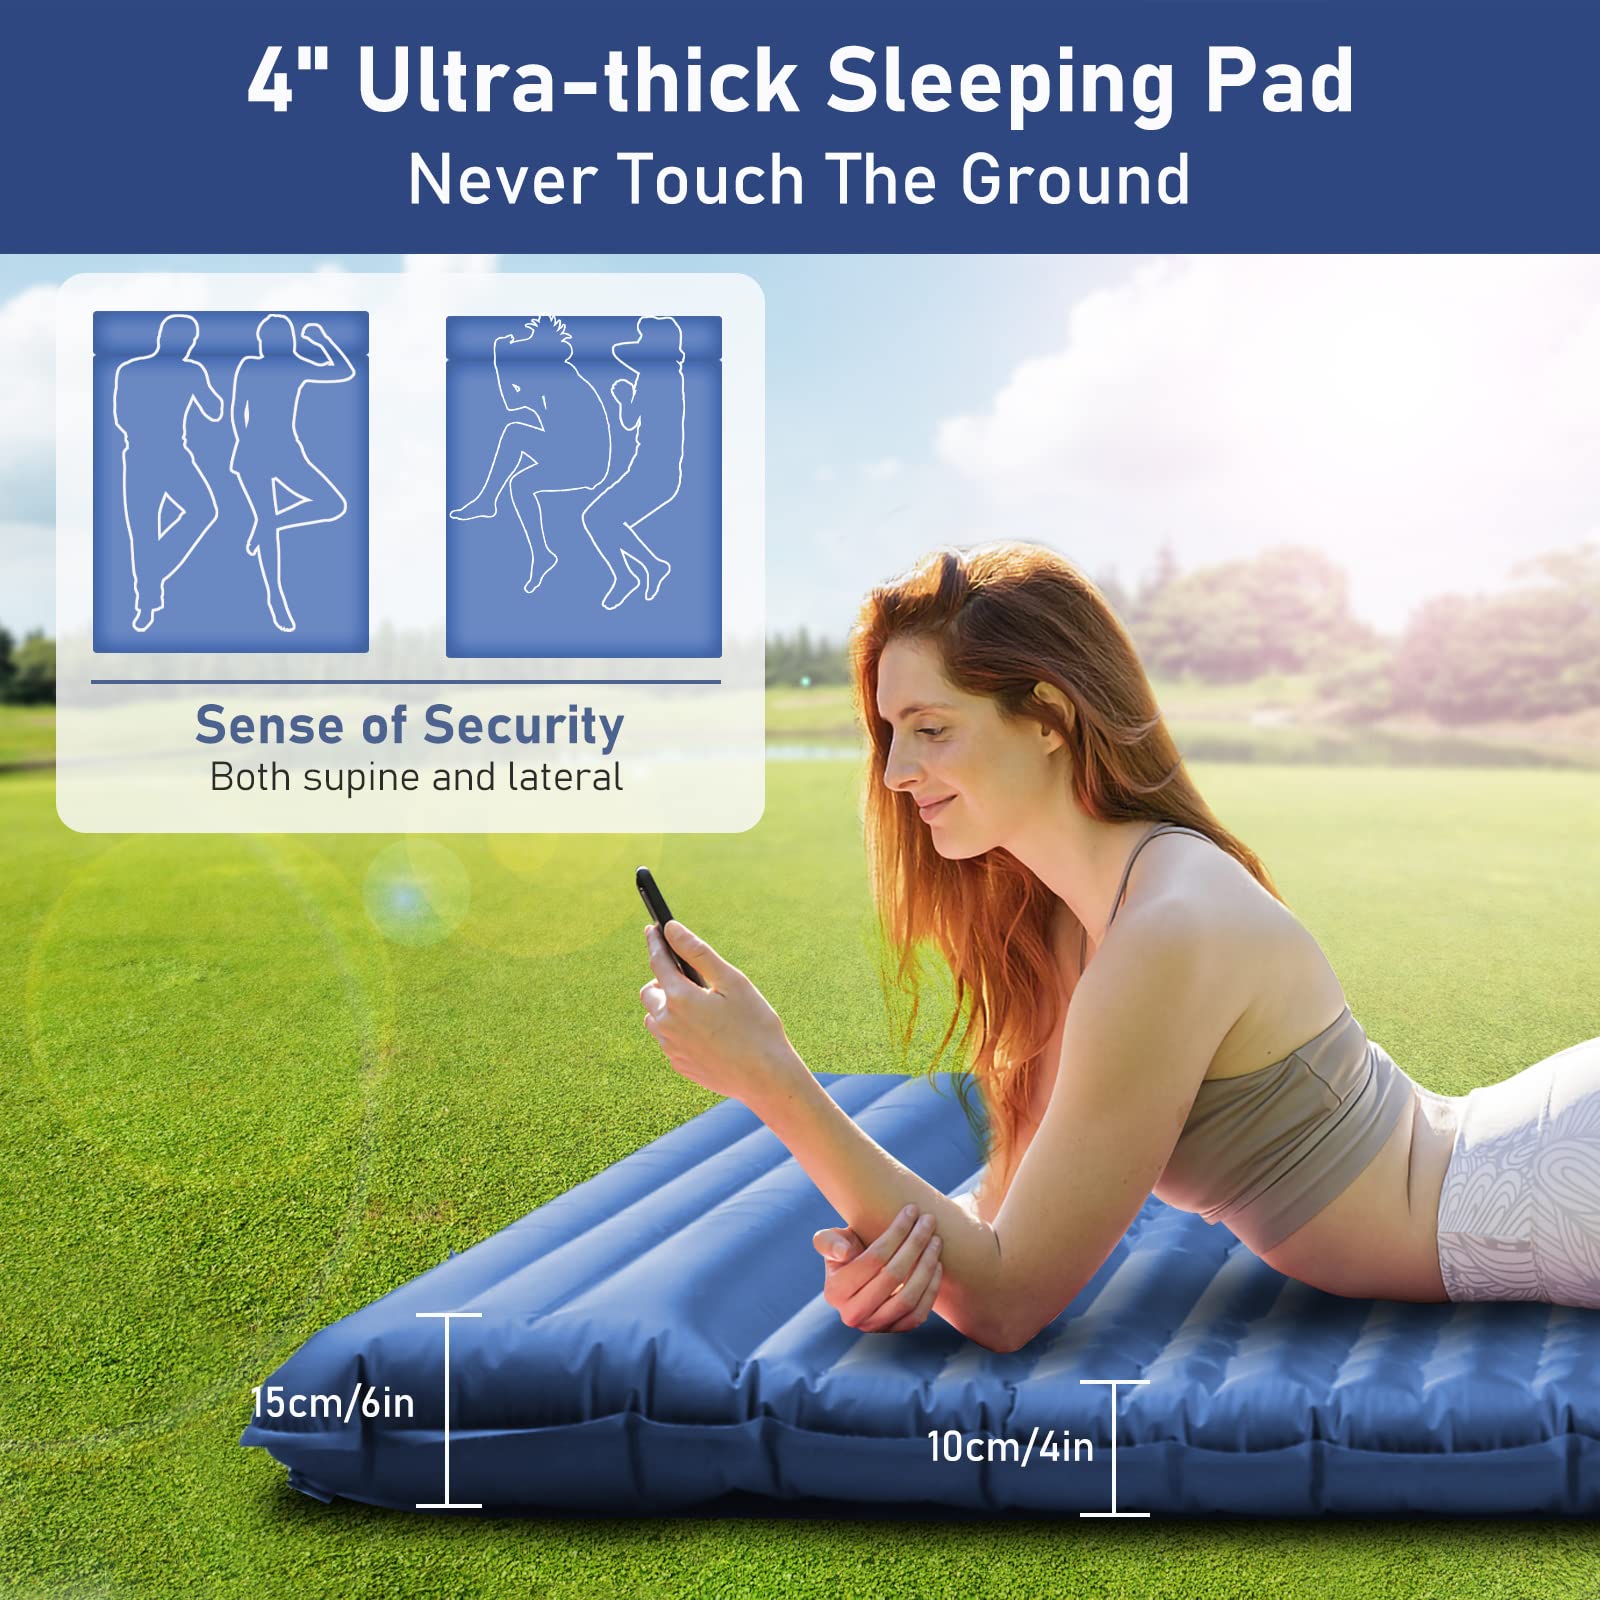 4" Ultra-Thick Self Inflating Double Sleeping Pad for Camping with Pillow Built-in Foot Pump Camping Sleeping Mat